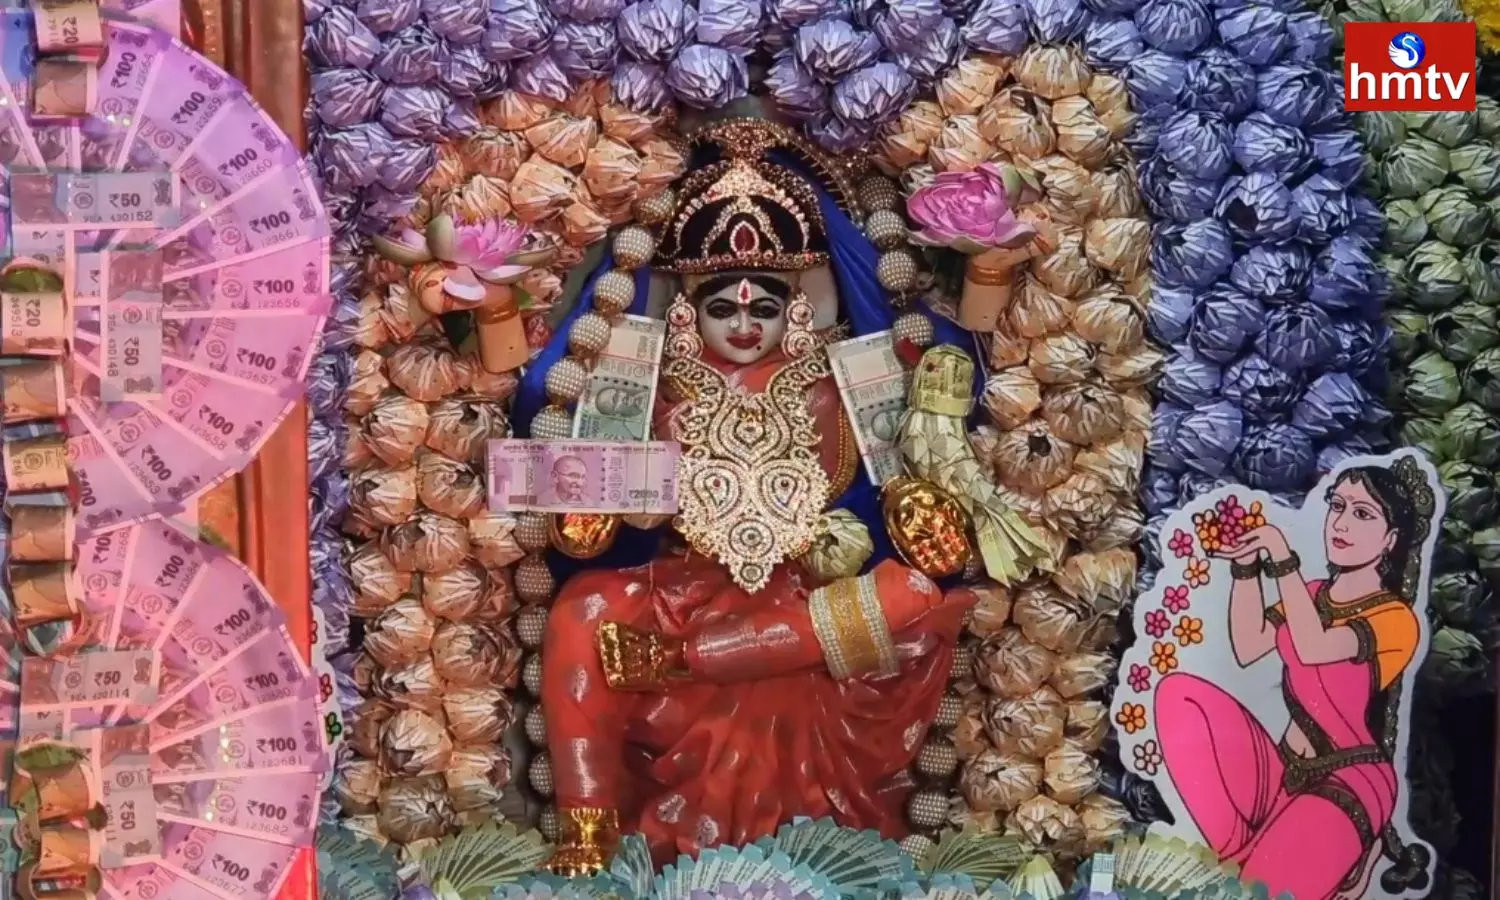 Decoration With Currency Notes Of Rs.5,11,11,116 Under The Auspices Of Arya Vaishya Sangam